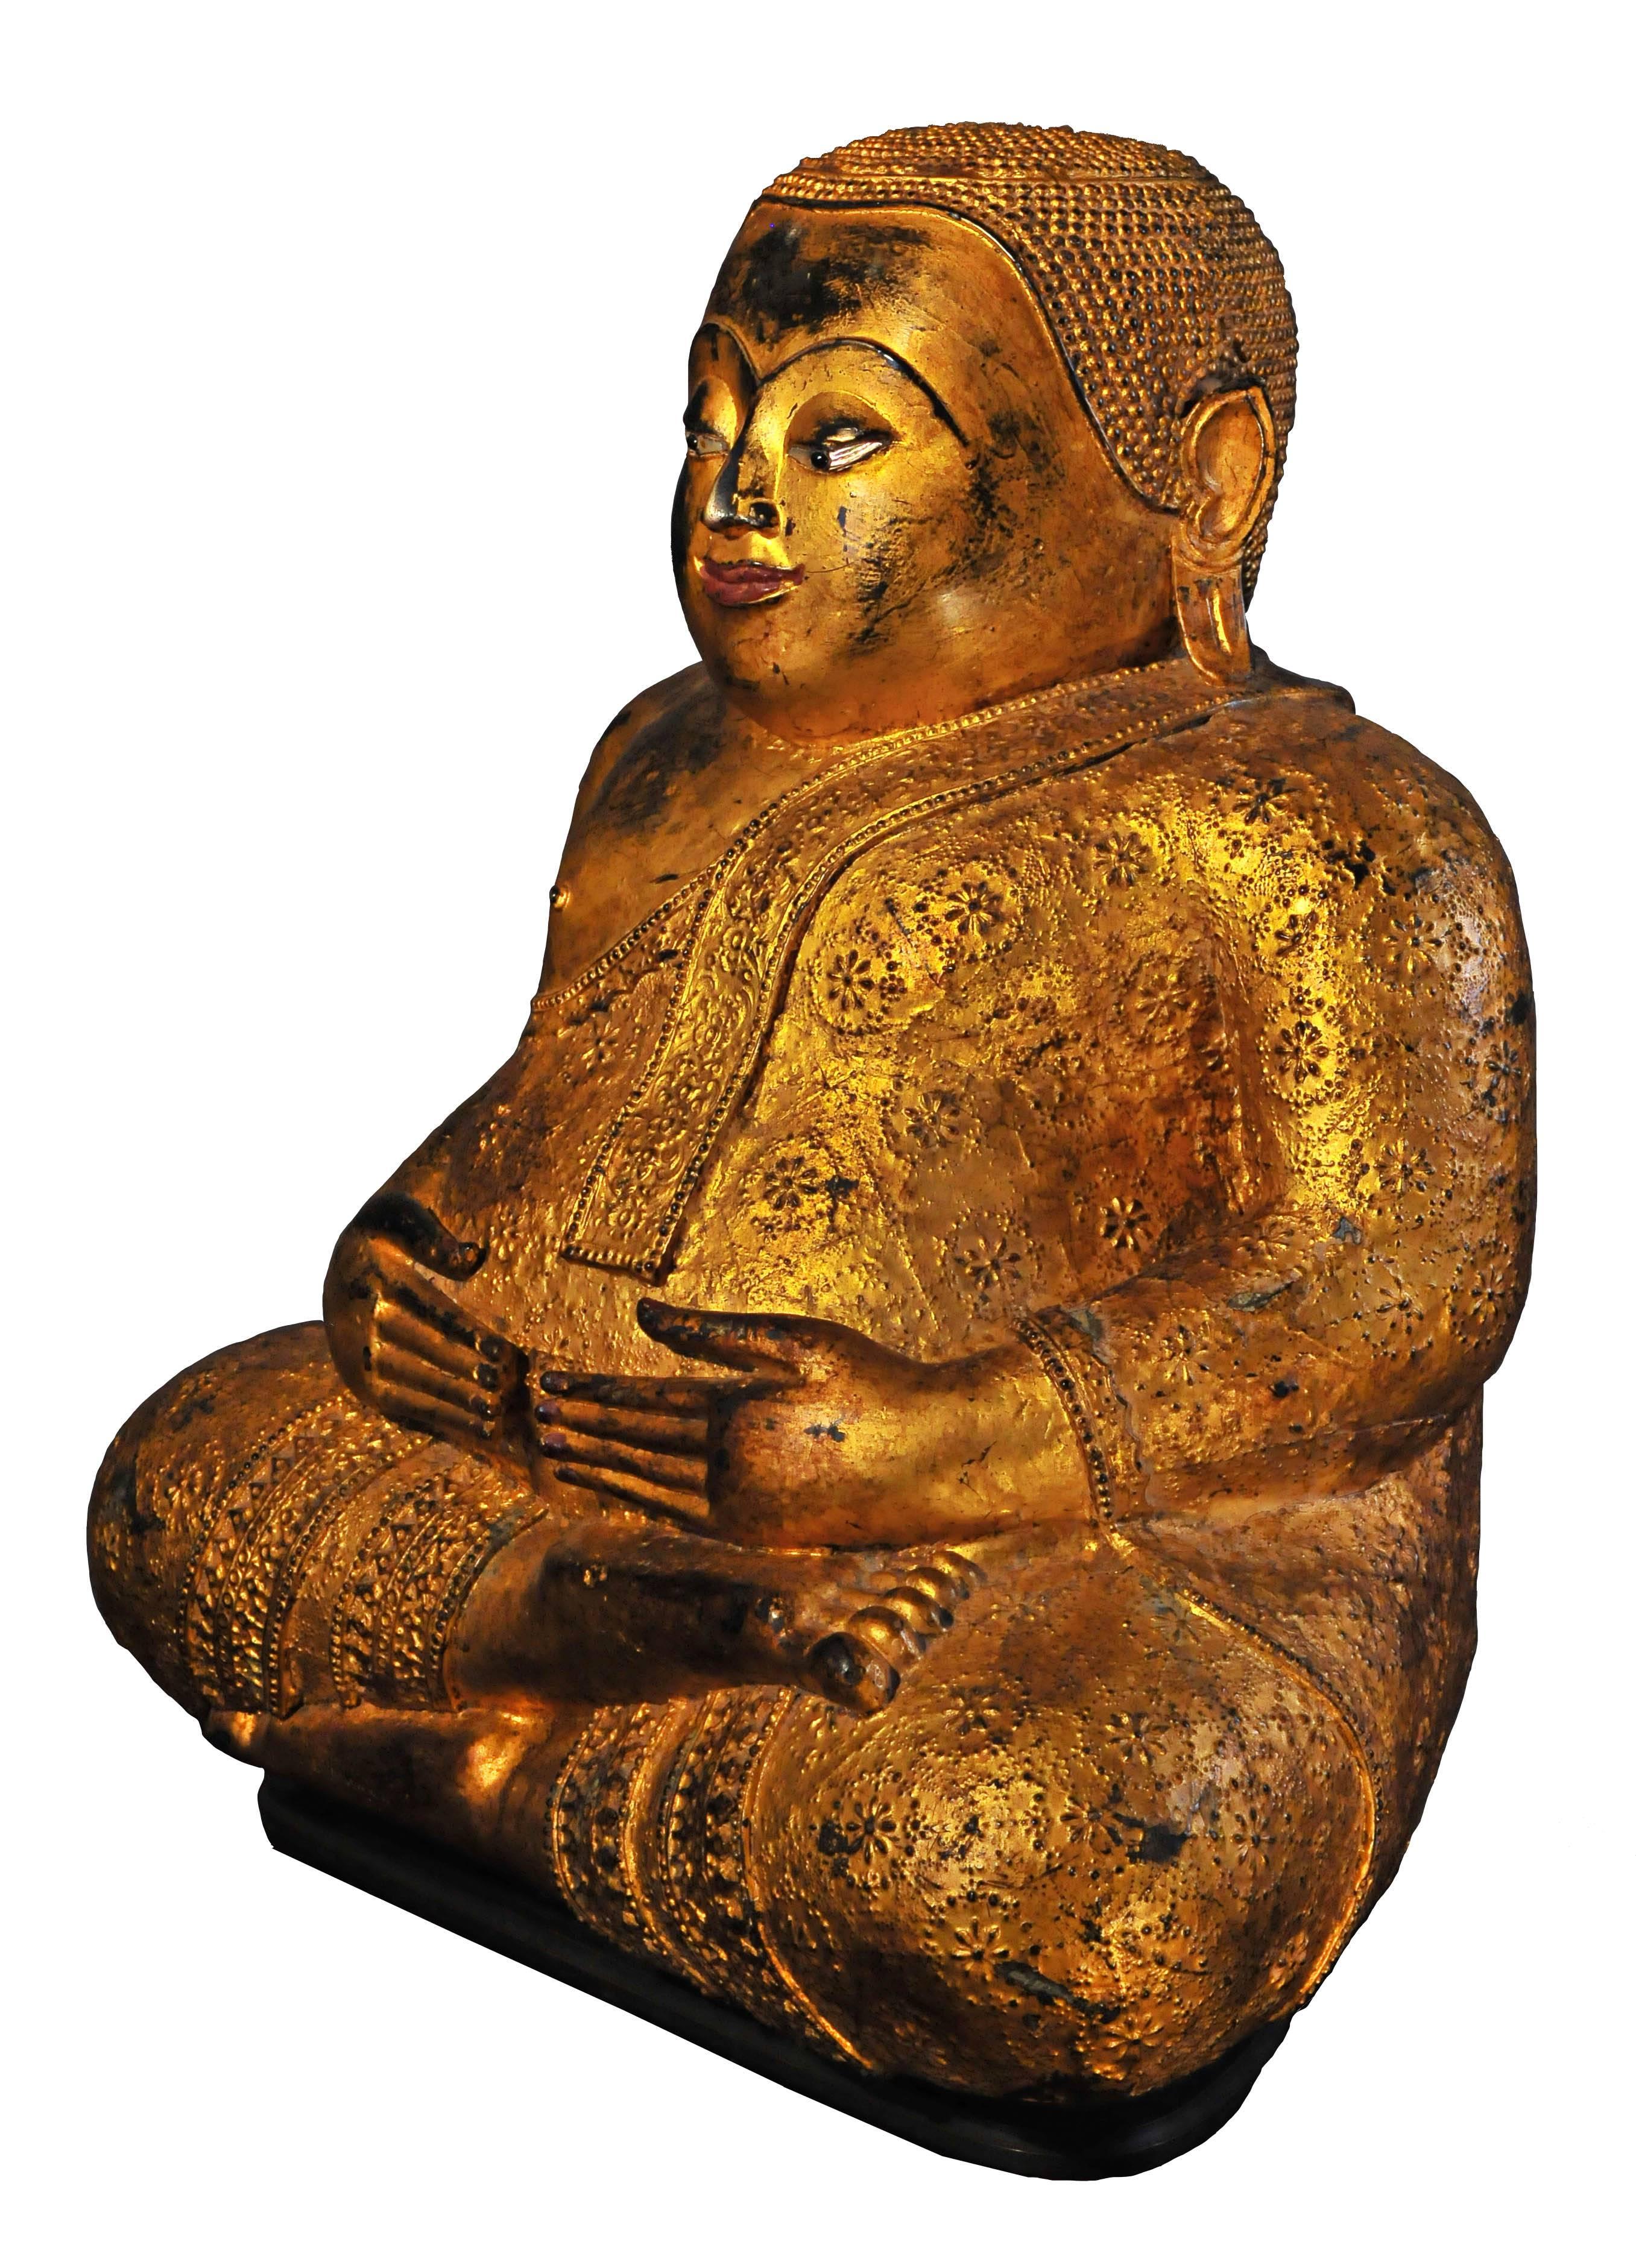 Thai sculptors have created a sacred art full of richness and incomparable beauty.
Impressed with a harmonious realism, these works, full of fervor and a deep sense of life, are also recommended by their natural expression.

The lovable fat,